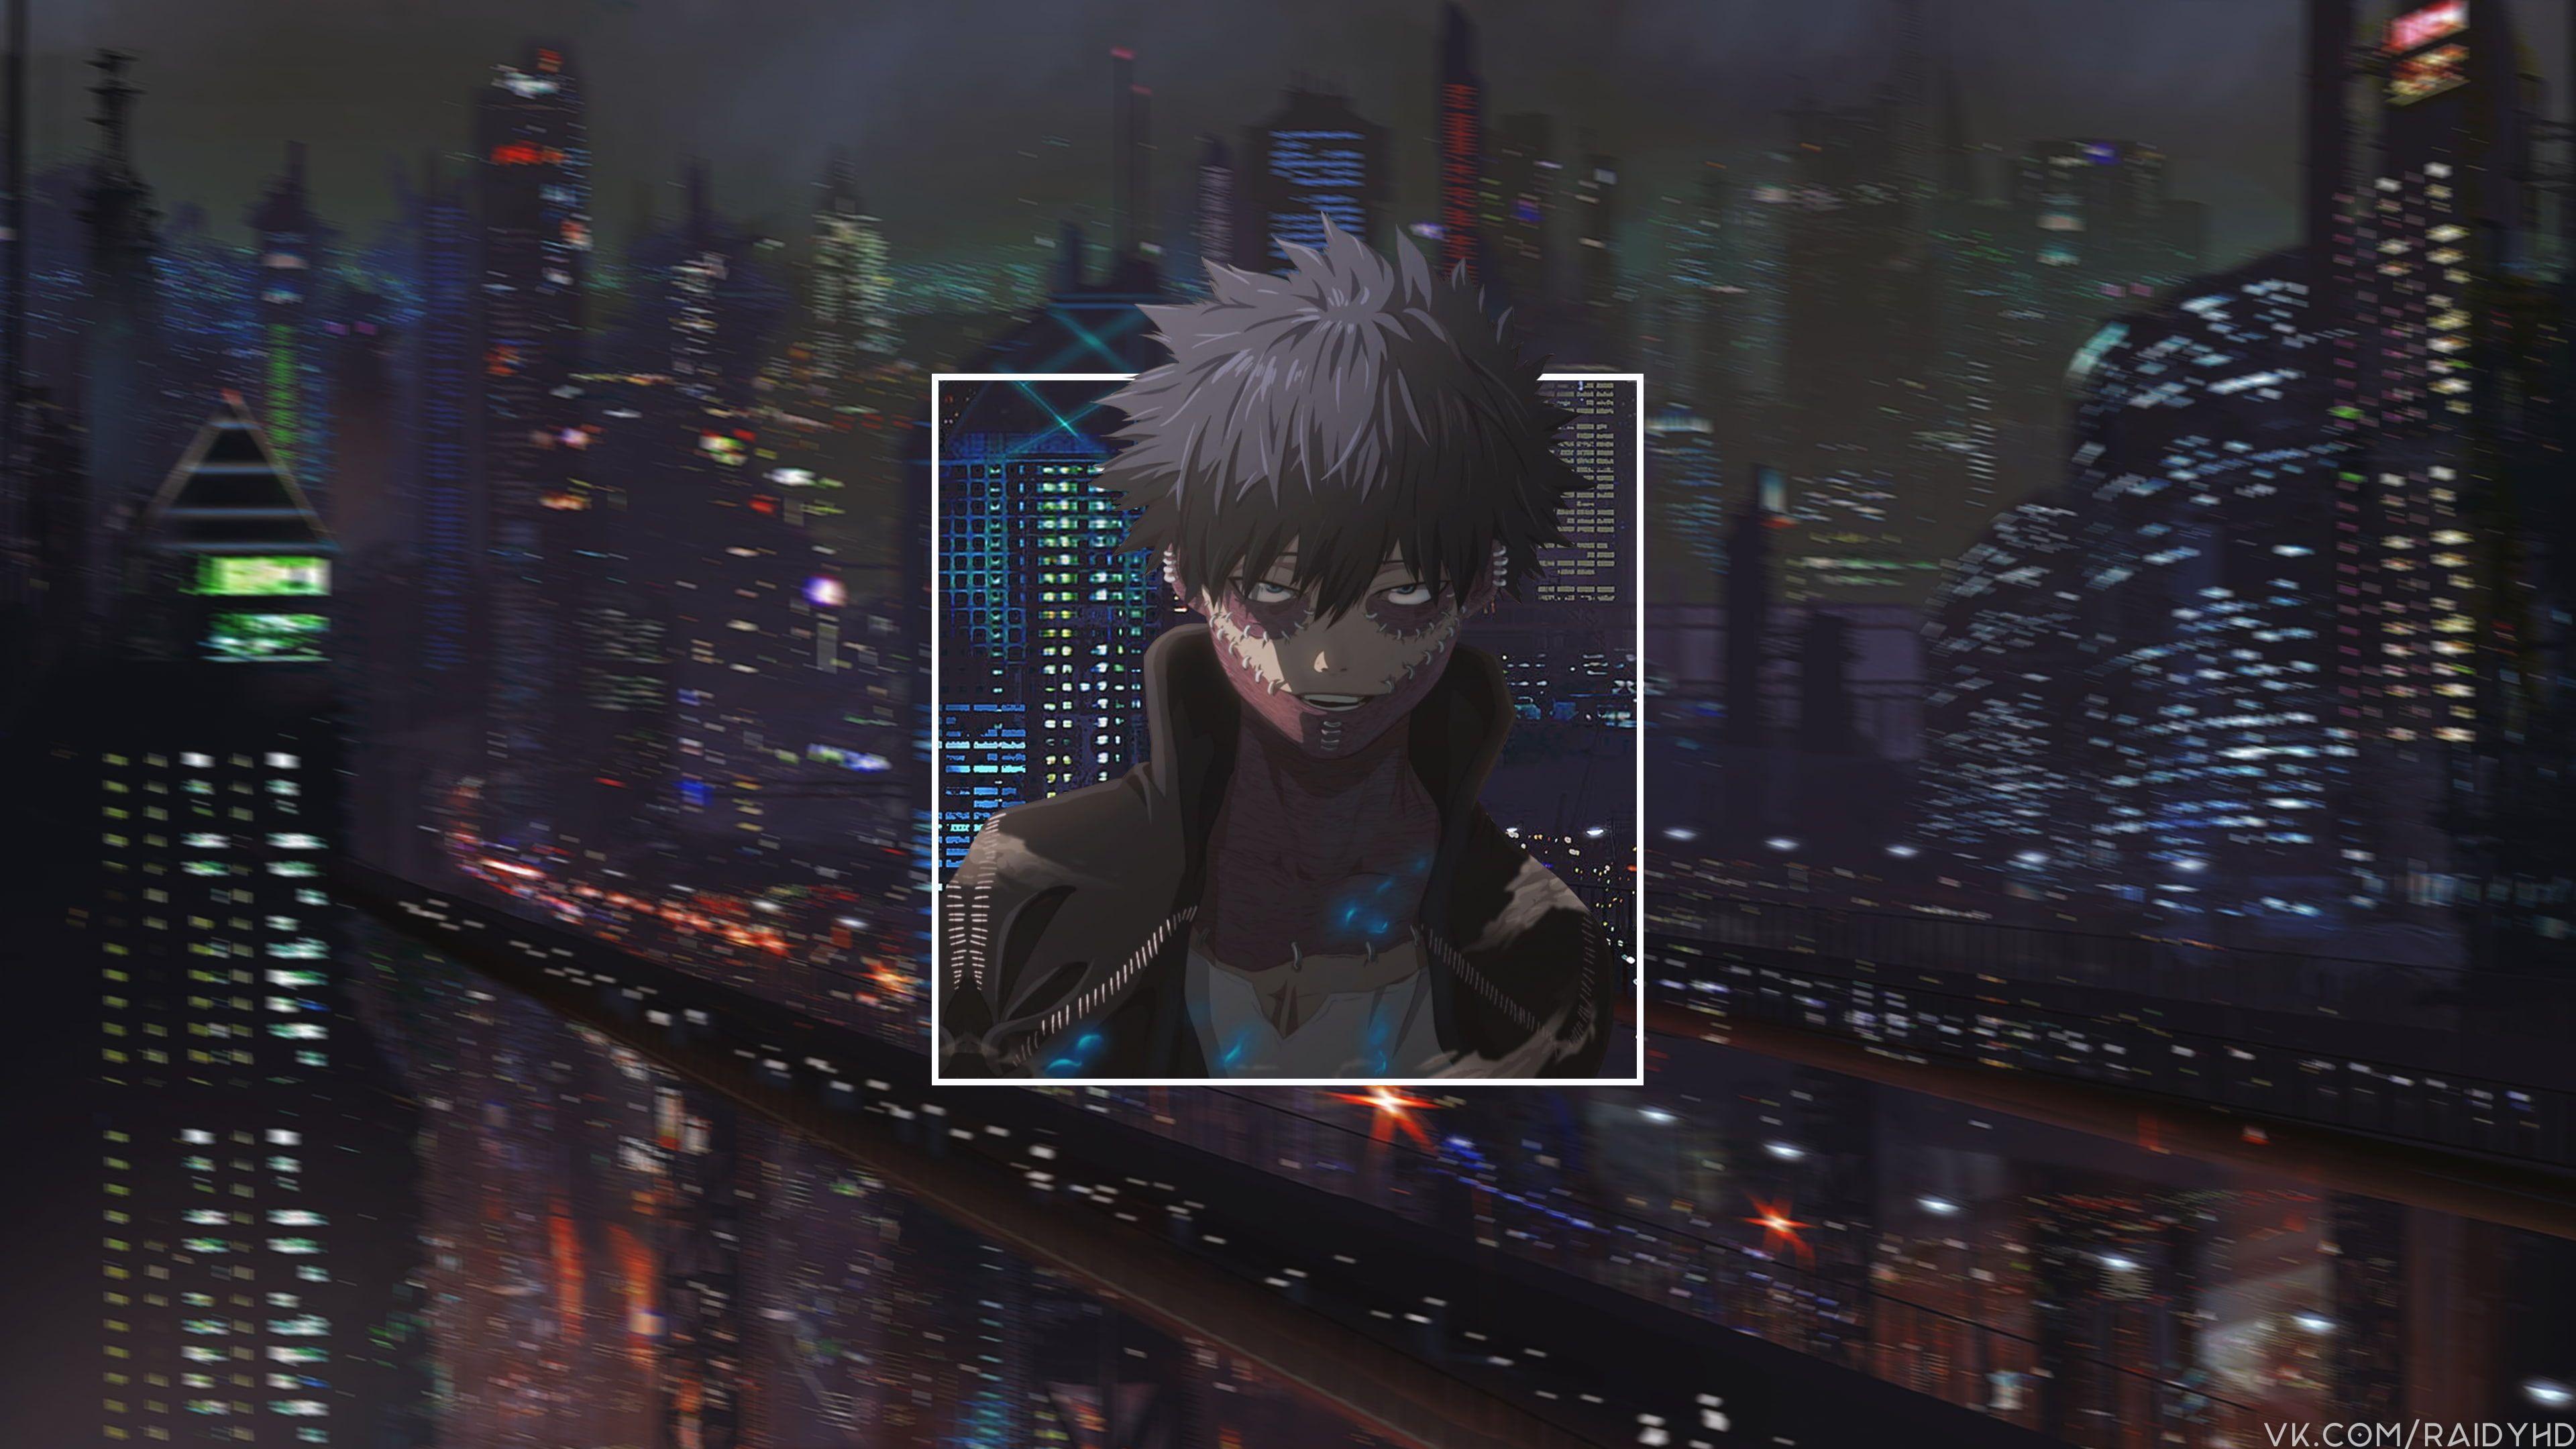 Anime Anime Boys #Dabi #picture In Picture K #wallpaper #hdwallpaper # Desktop. Cute Desktop Wallpaper, Anime Computer Wallpaper, Bape Wallpaper